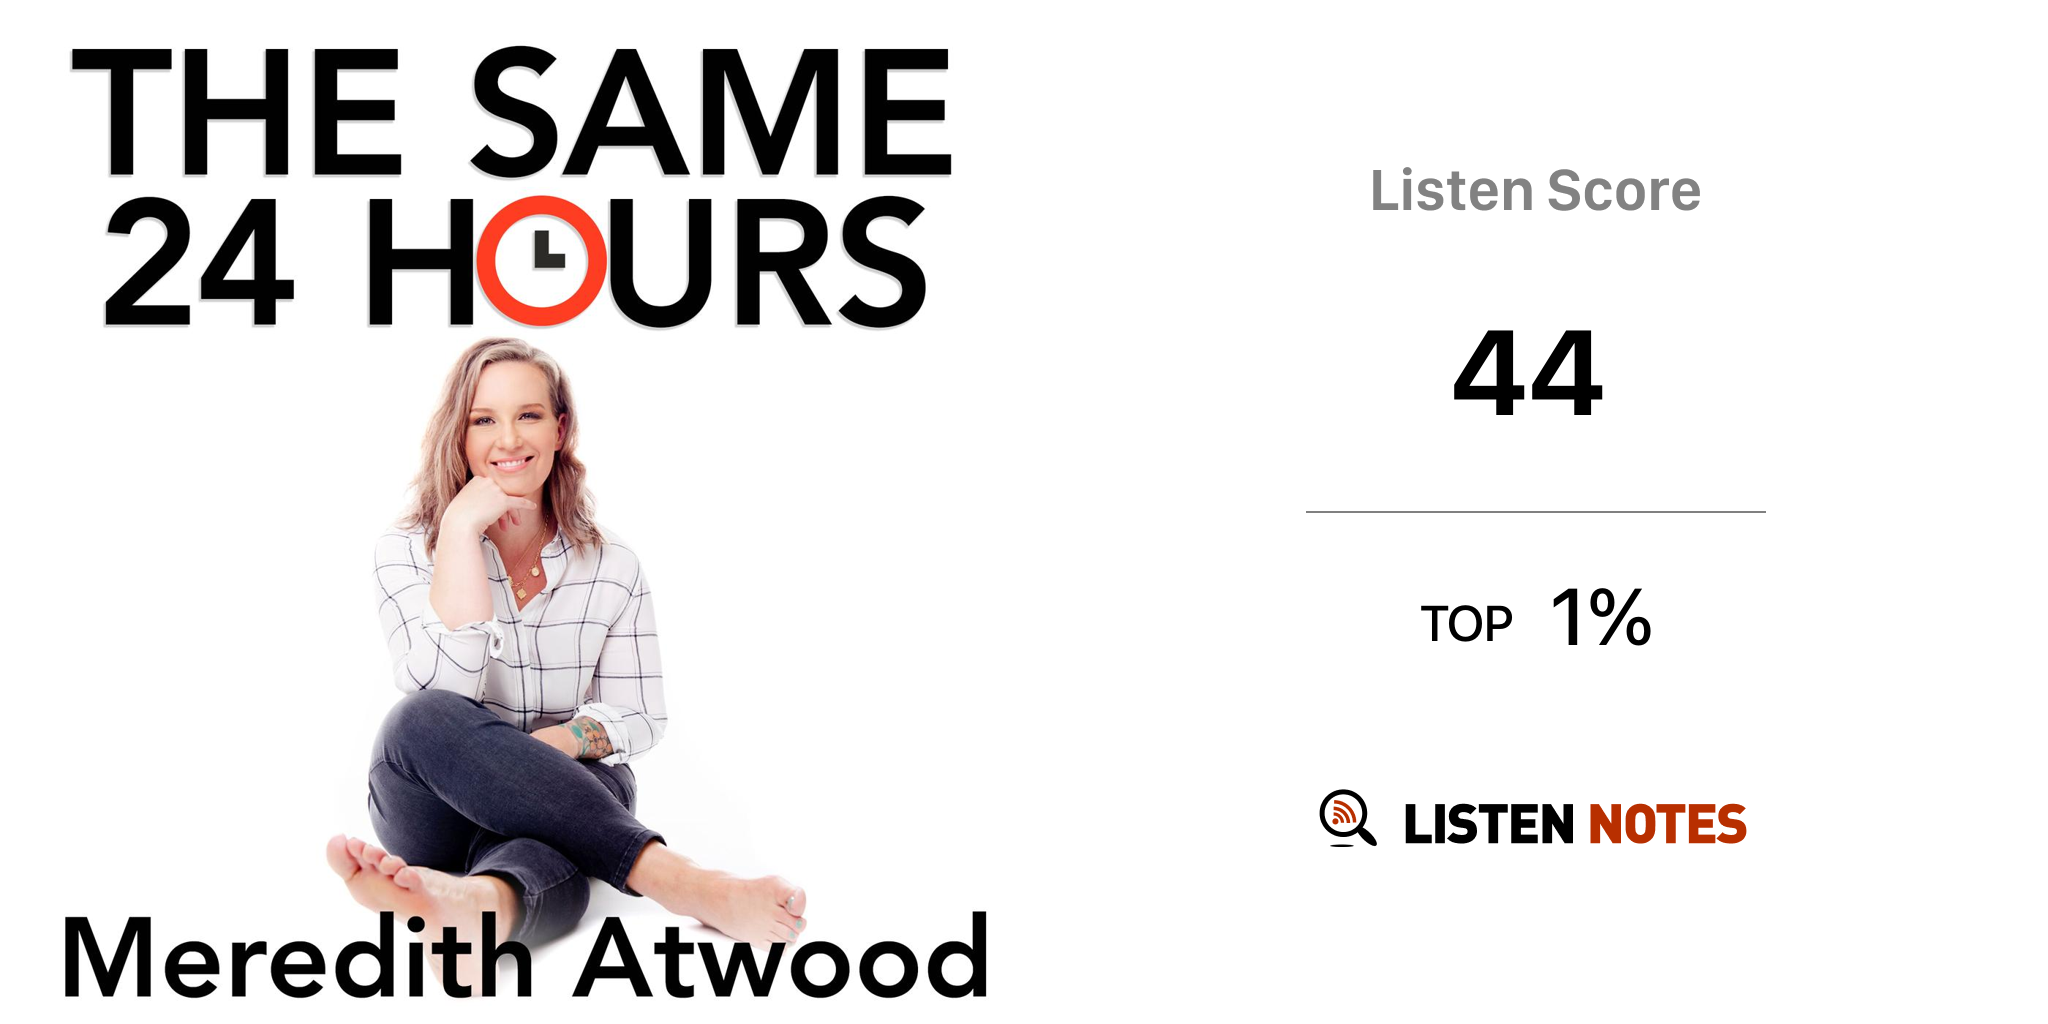 The Same 24 Hours (podcast) - Meredith Atwood